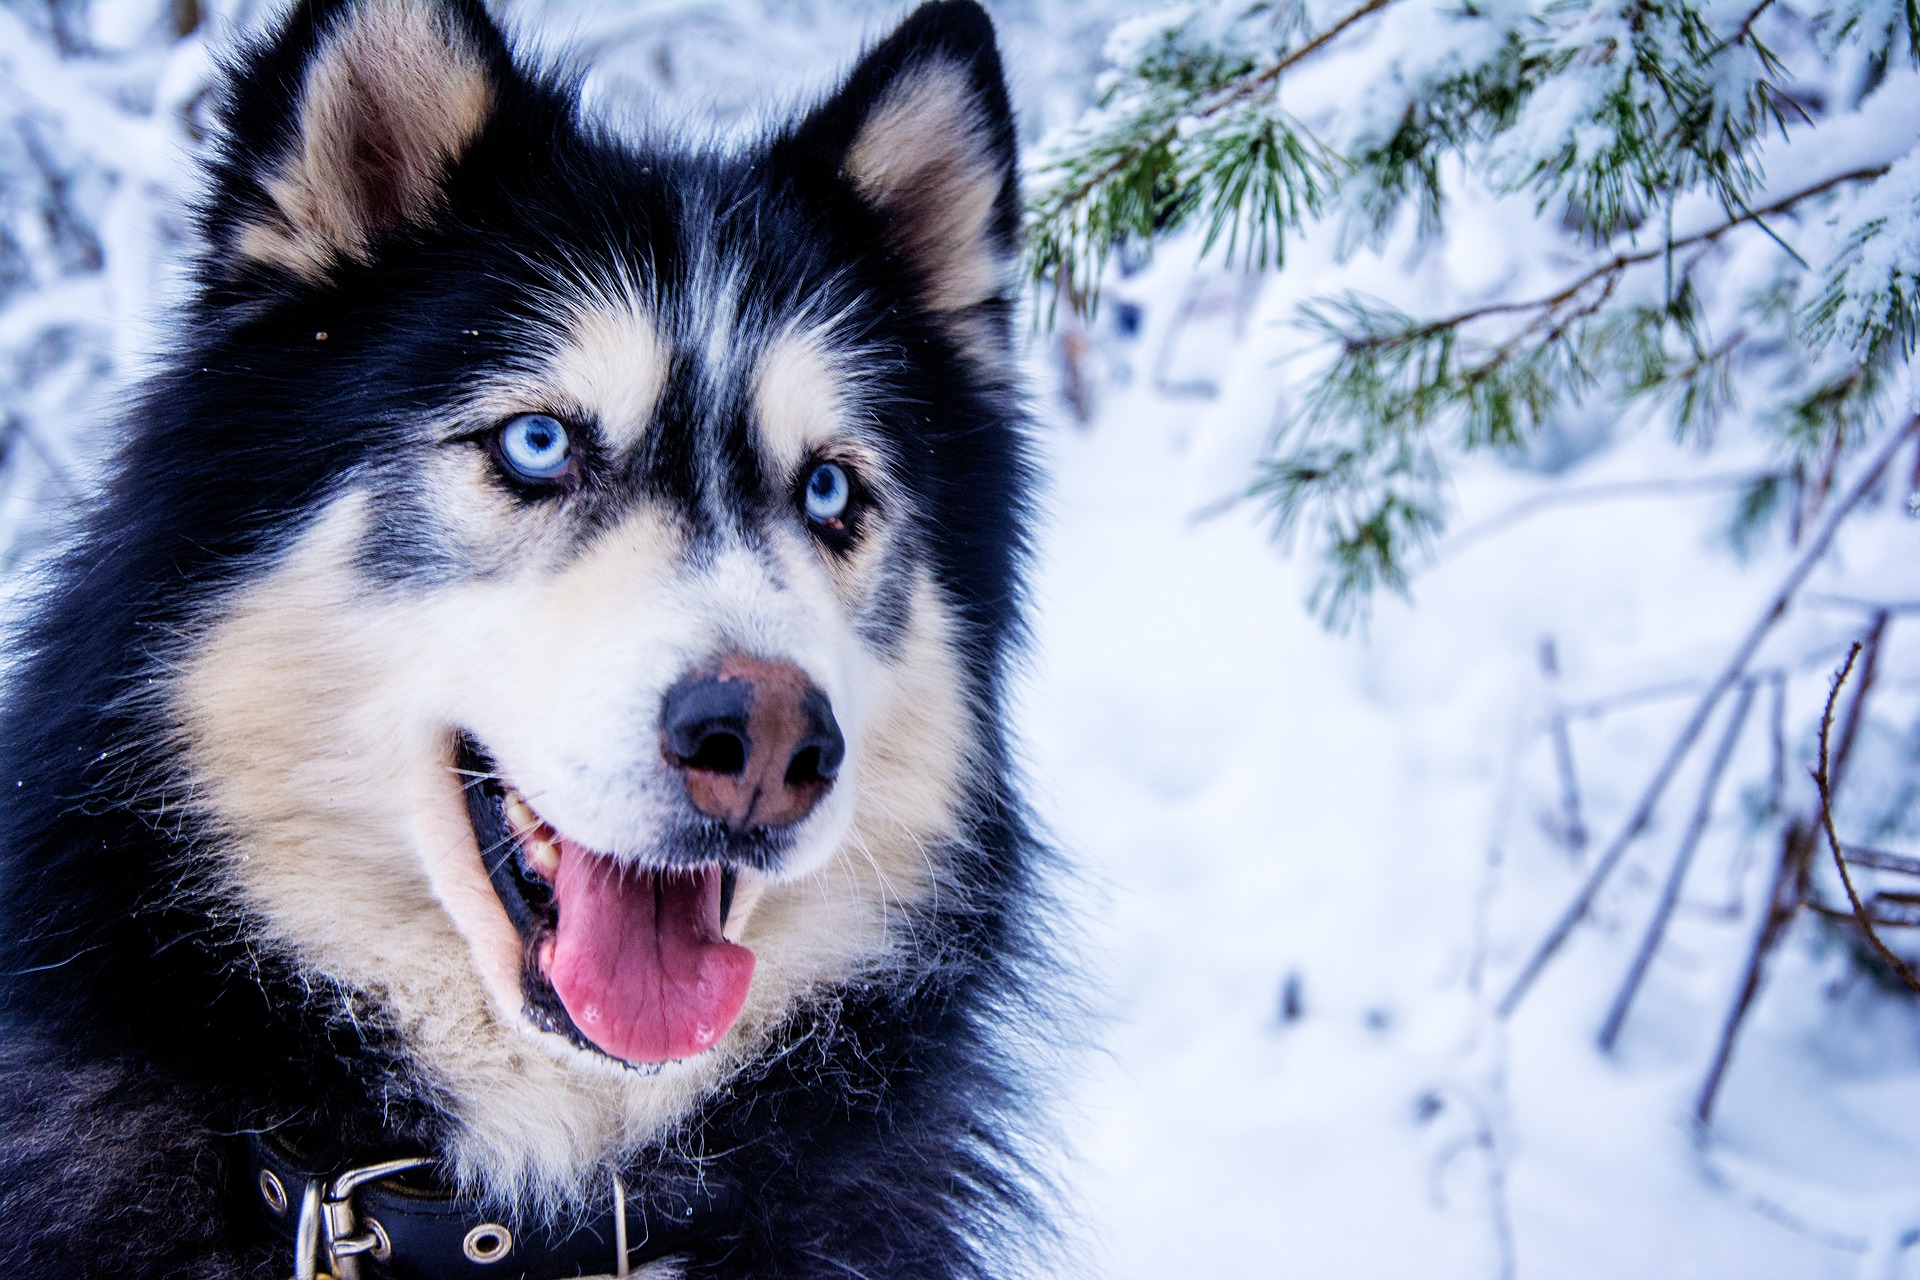 Husky Blue Eyes: Why They’re Blue